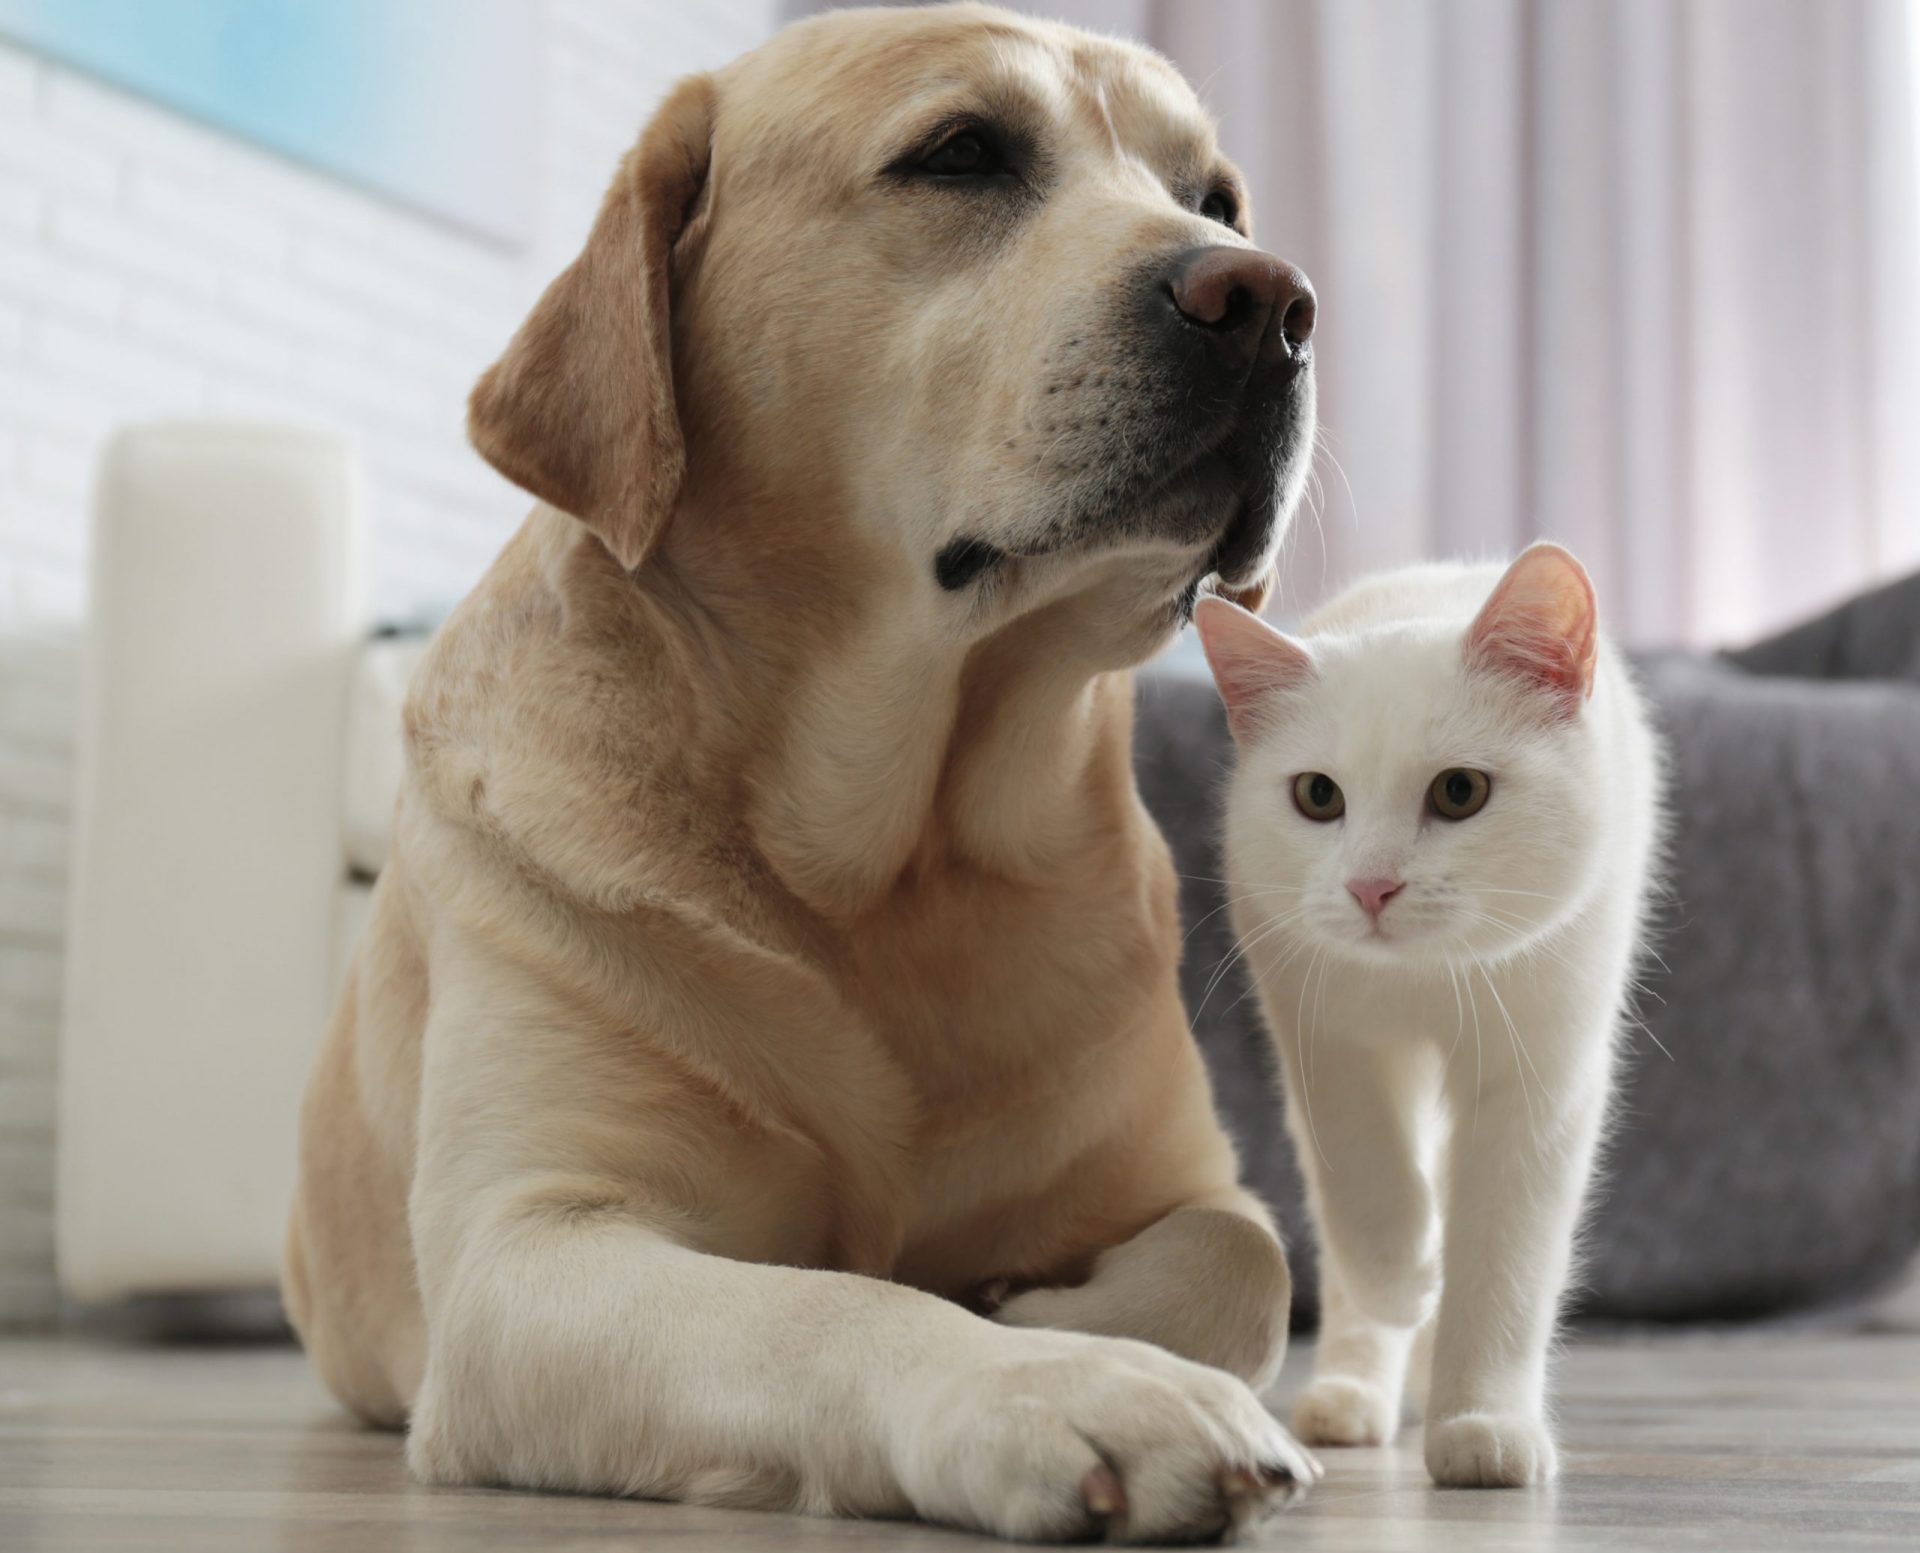 Adorable dog and cat together on floor indoors. Friends forever